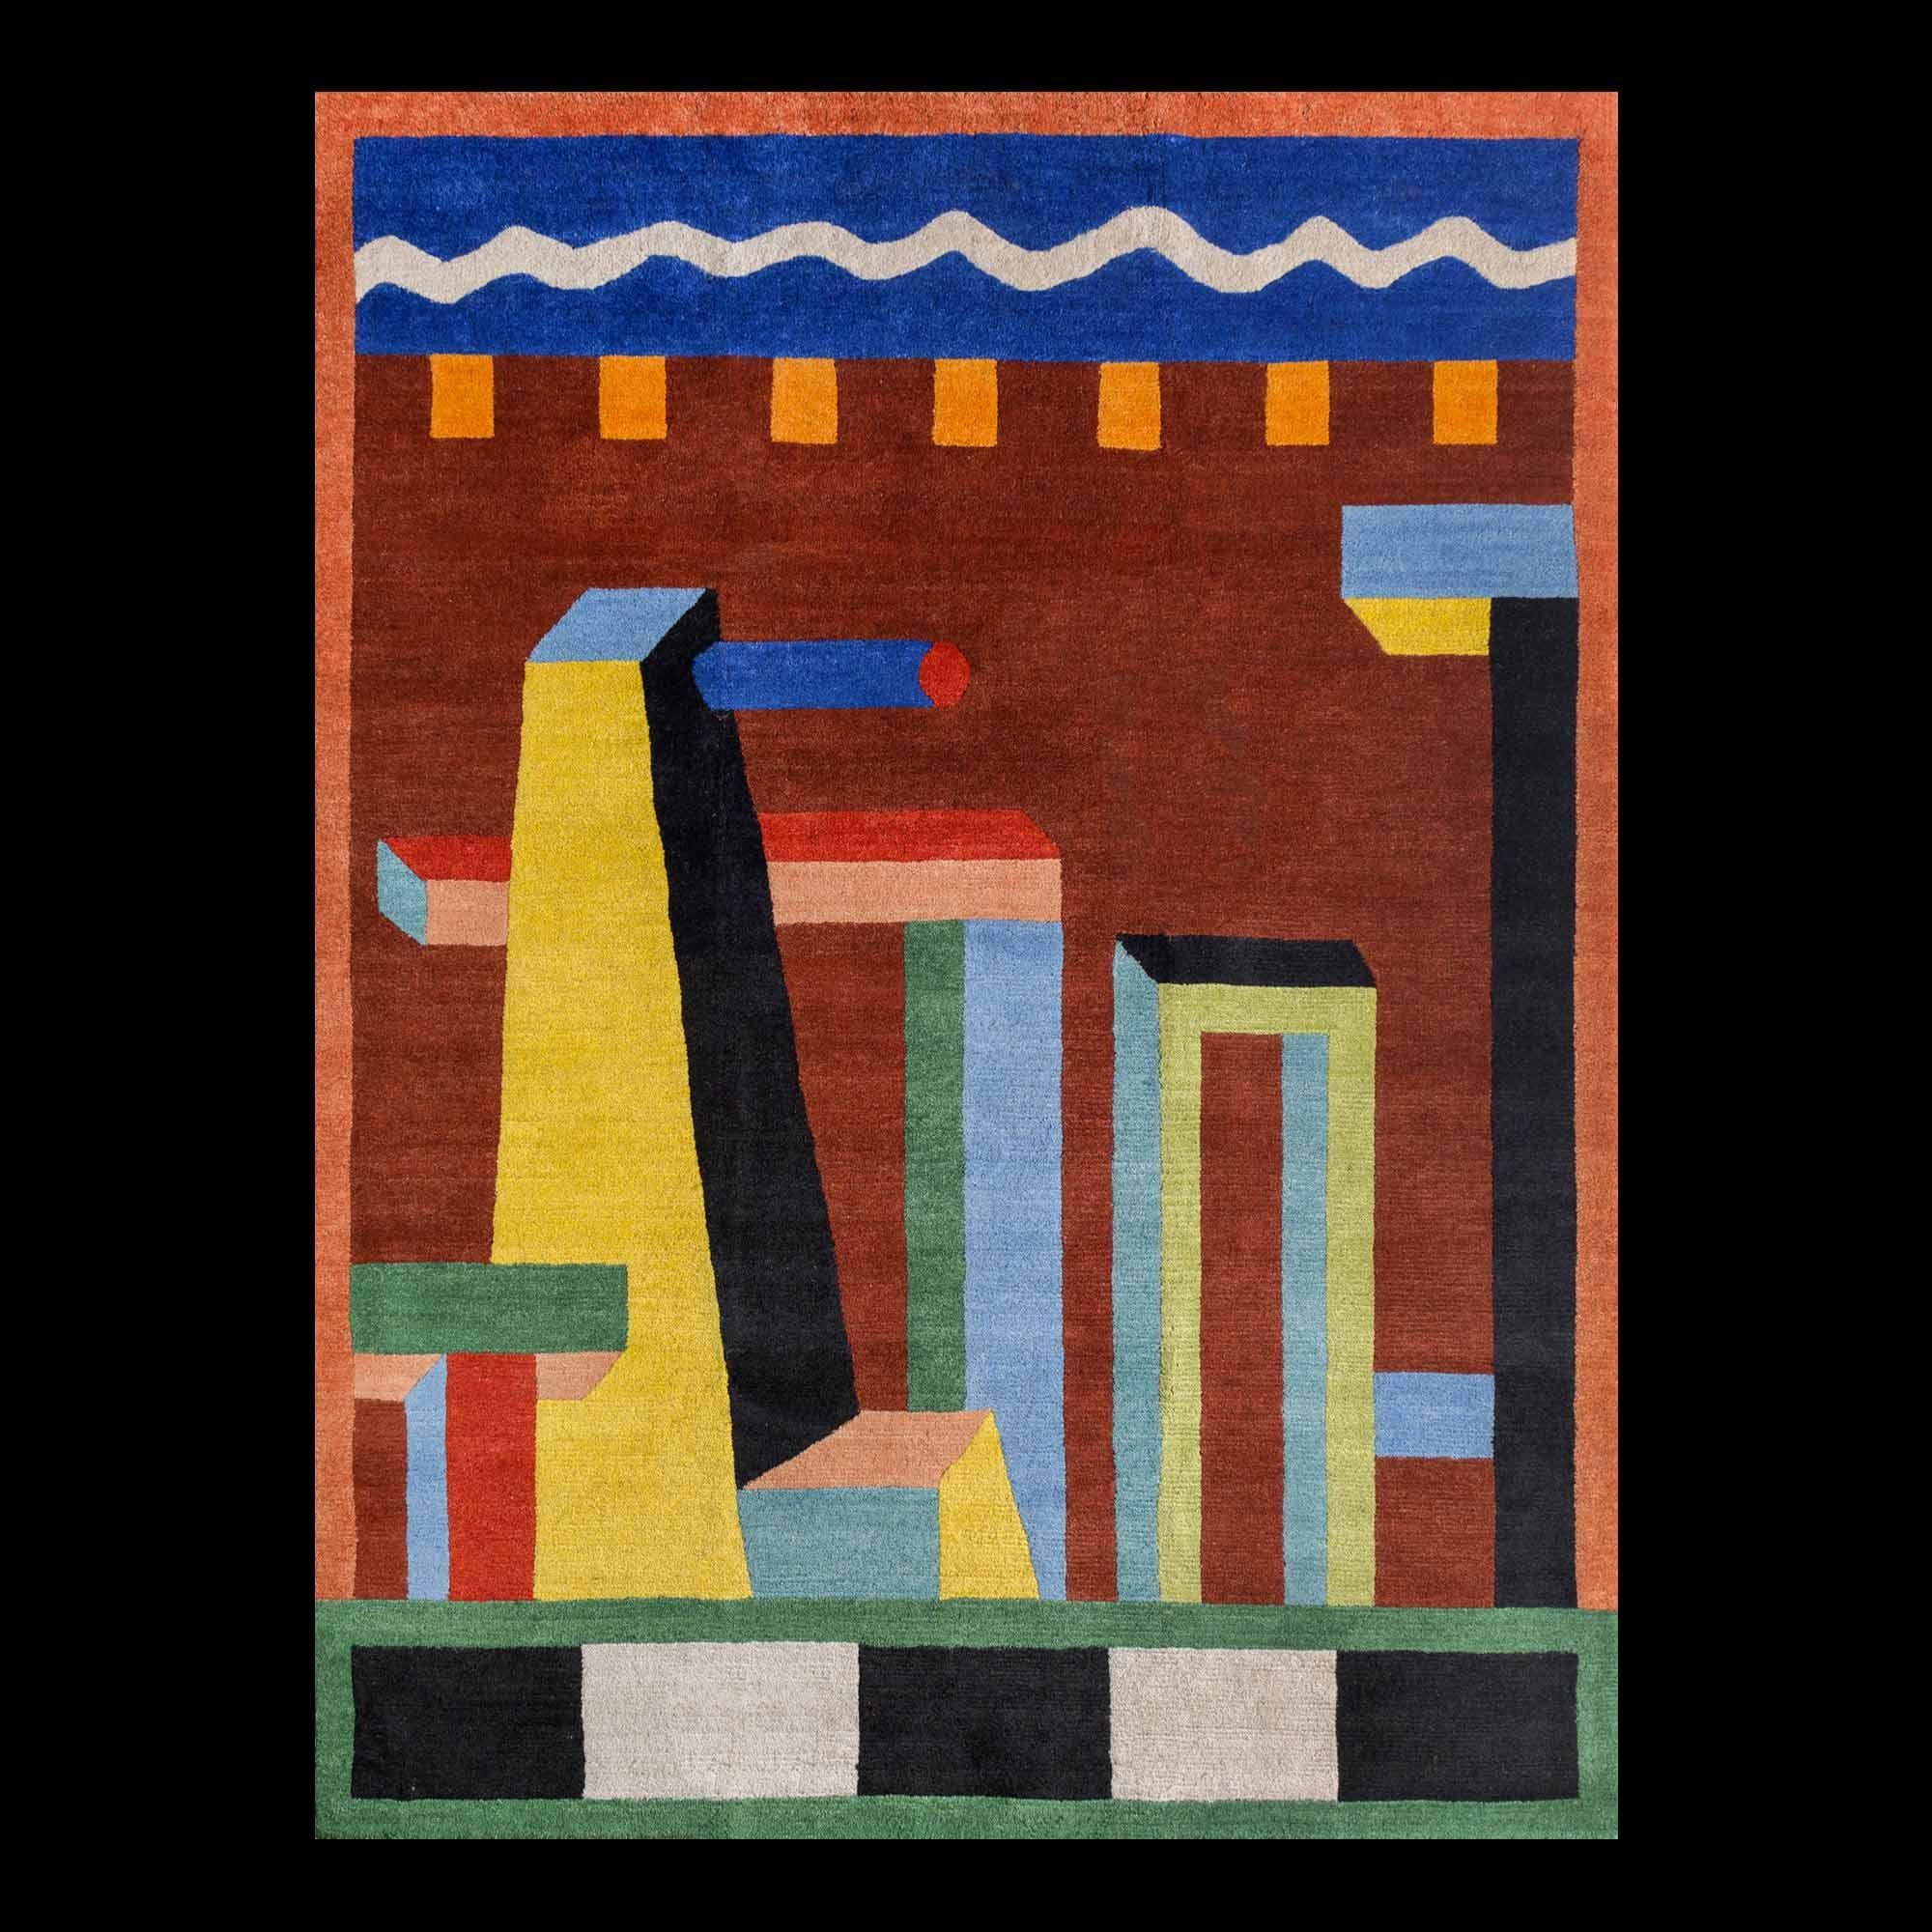 NDP51 woollen carpet by Nathalie Du Pasquier for Post Design collection/Memphis

A woollen carpet handcrafted by different Nepalese artisans. Made in a limited edition of 36 signed, numbered examples.

As the carpet is made by hand, there are